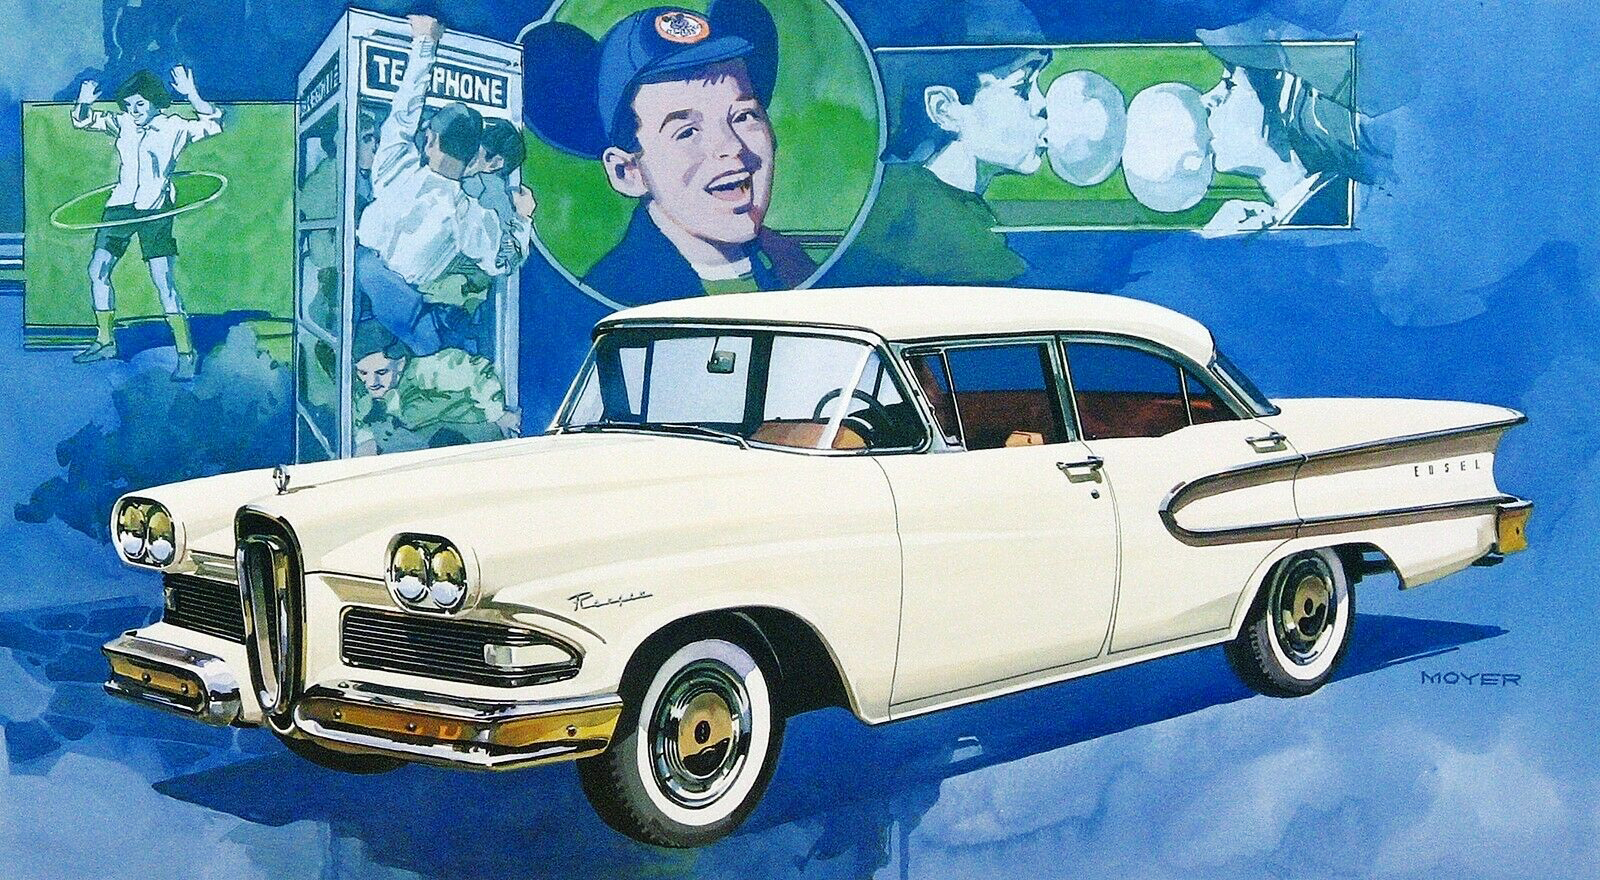 1958 Edsel: Illustrated by Robert M. Moyer